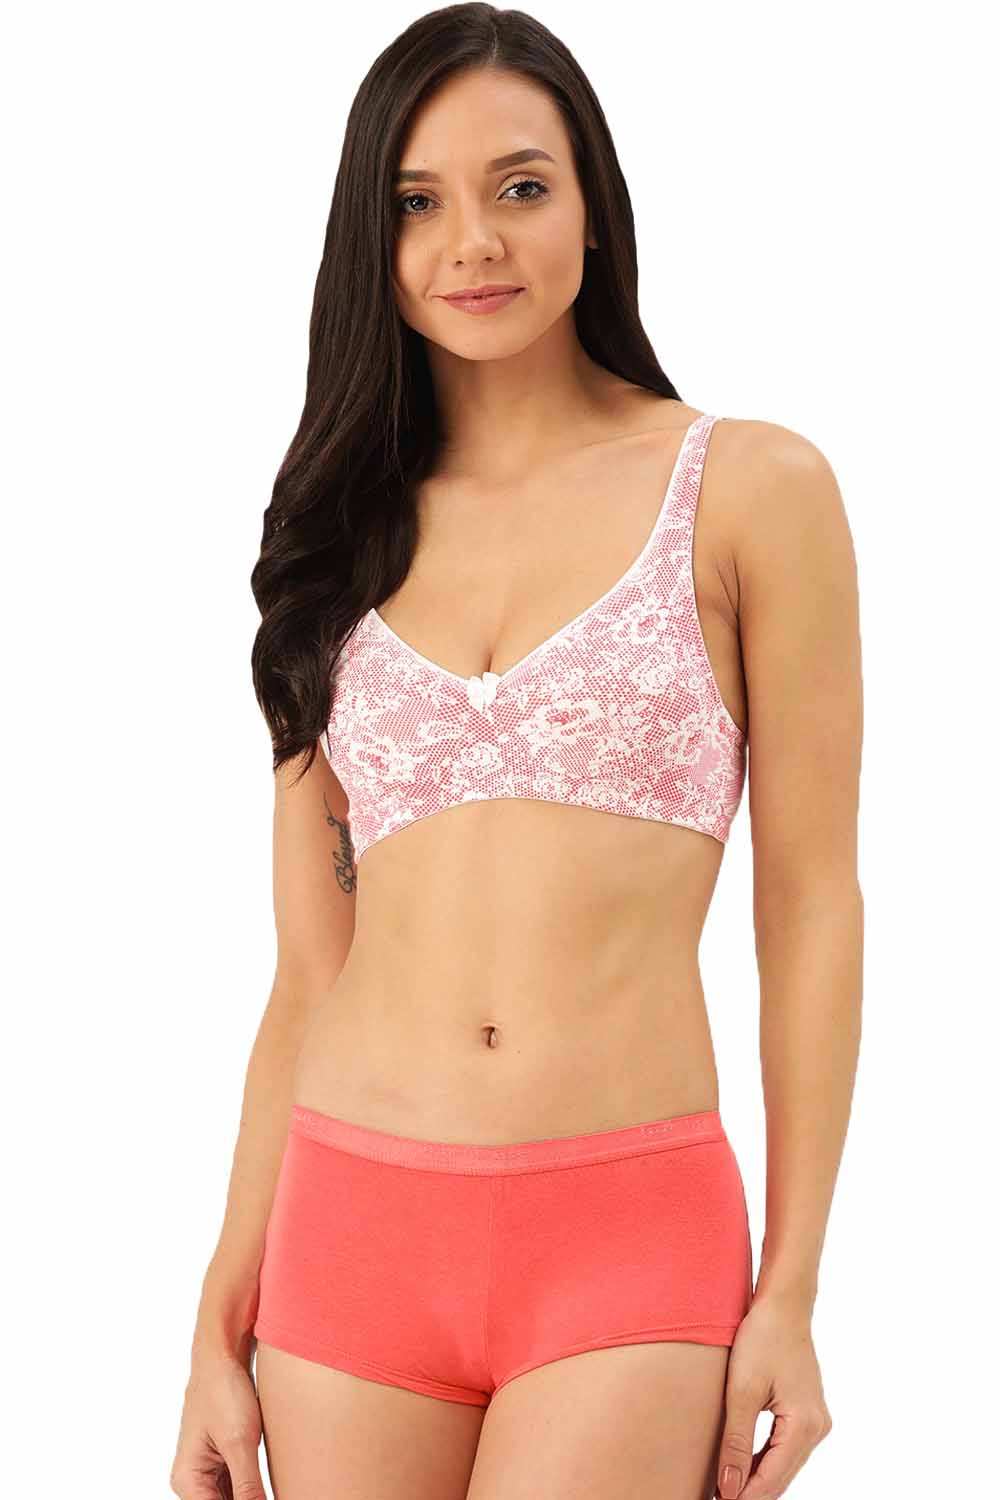 Buy Inner Sense Organic Cotton Antimicrobial Soft Laced Bra - Pink online